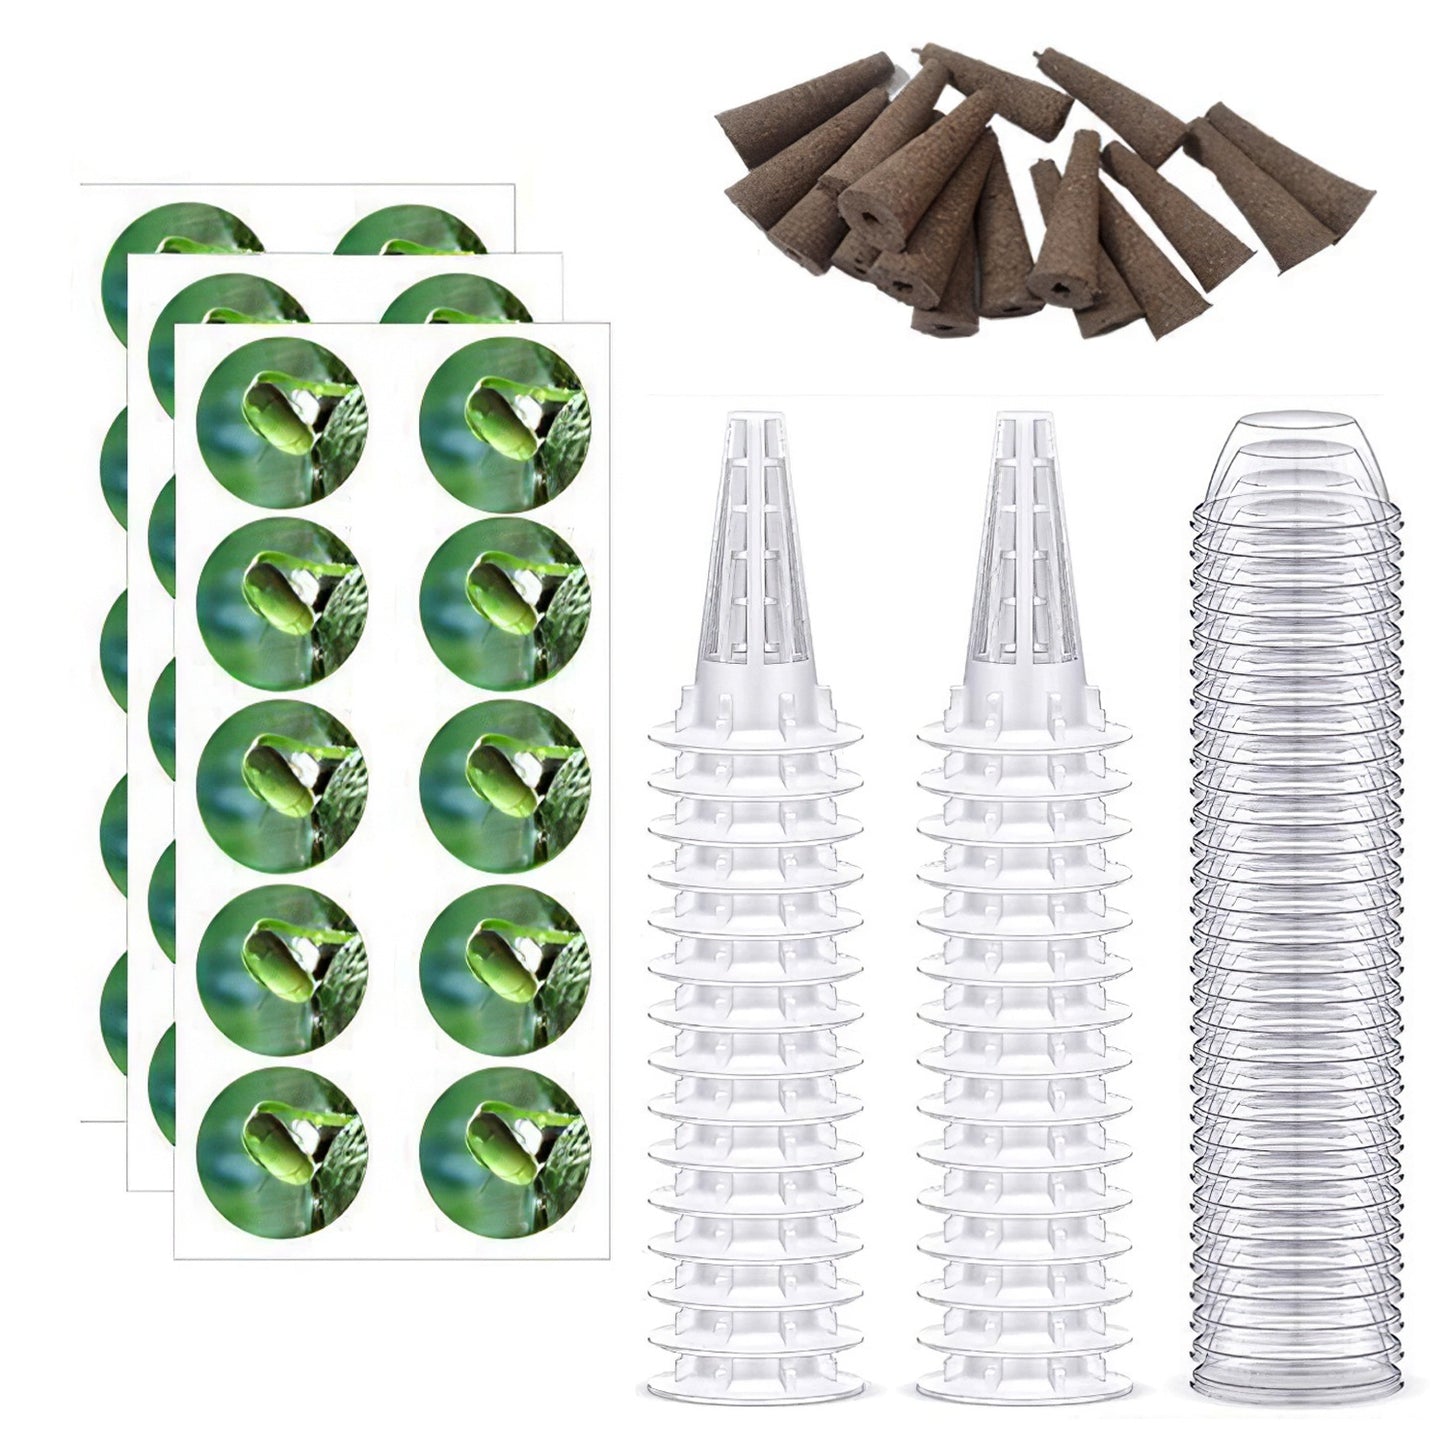 120Pcs Hydroponic Seed Pod Kit - Grow Anything Containers with Baskets, Lids, Sponges & Stickers